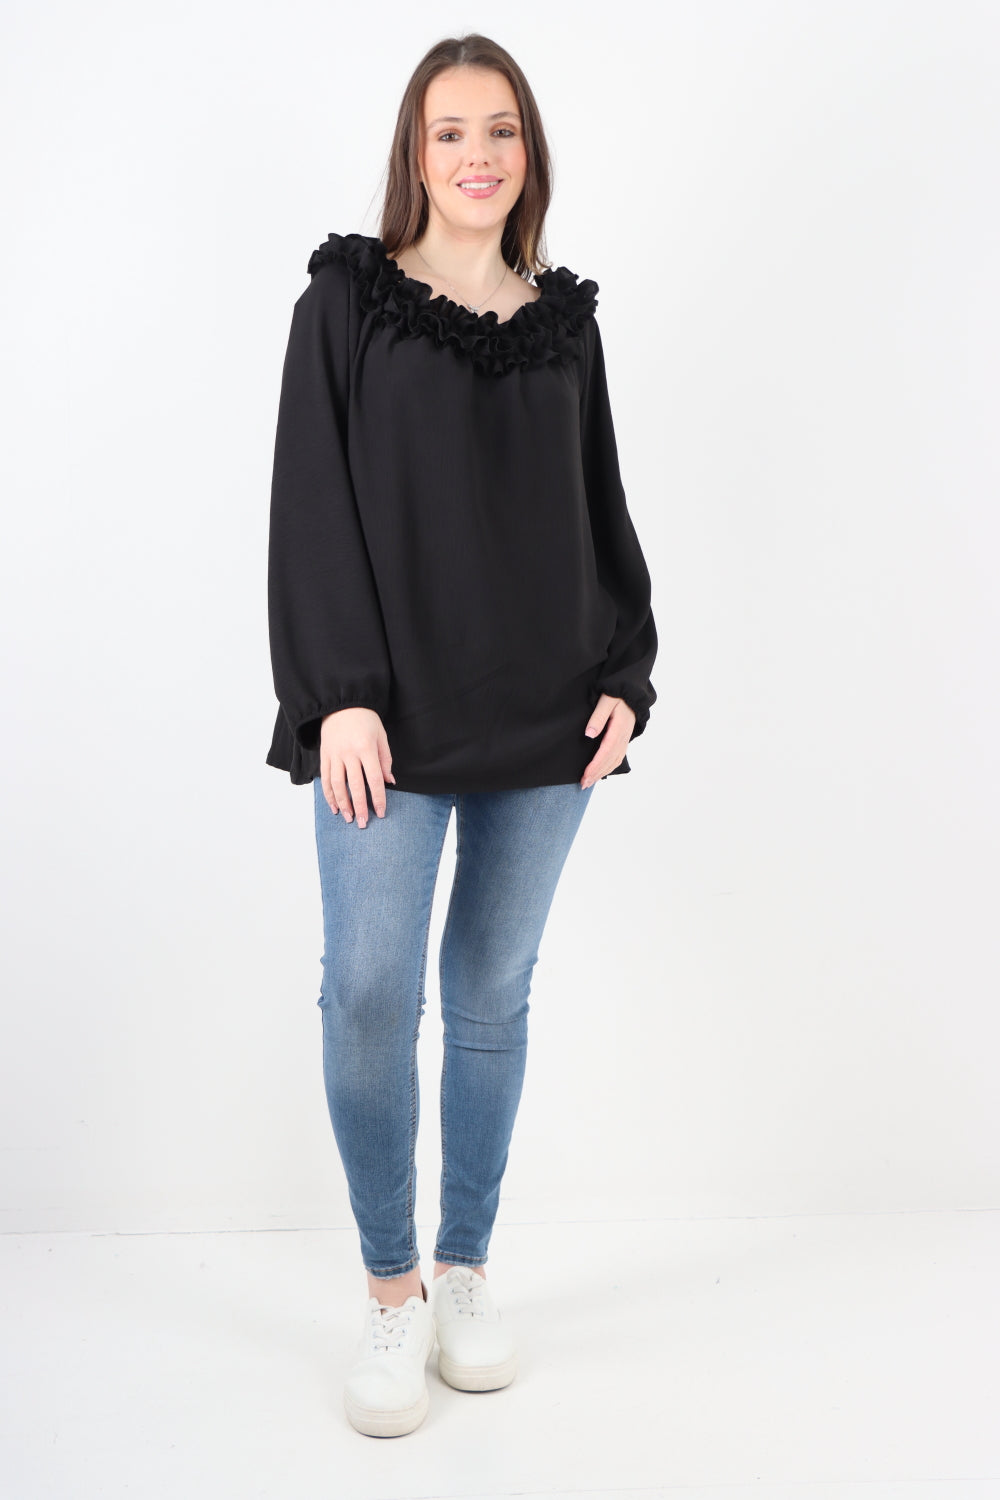 Ruffled Neck Off The Shoulder Long Sleeve Top